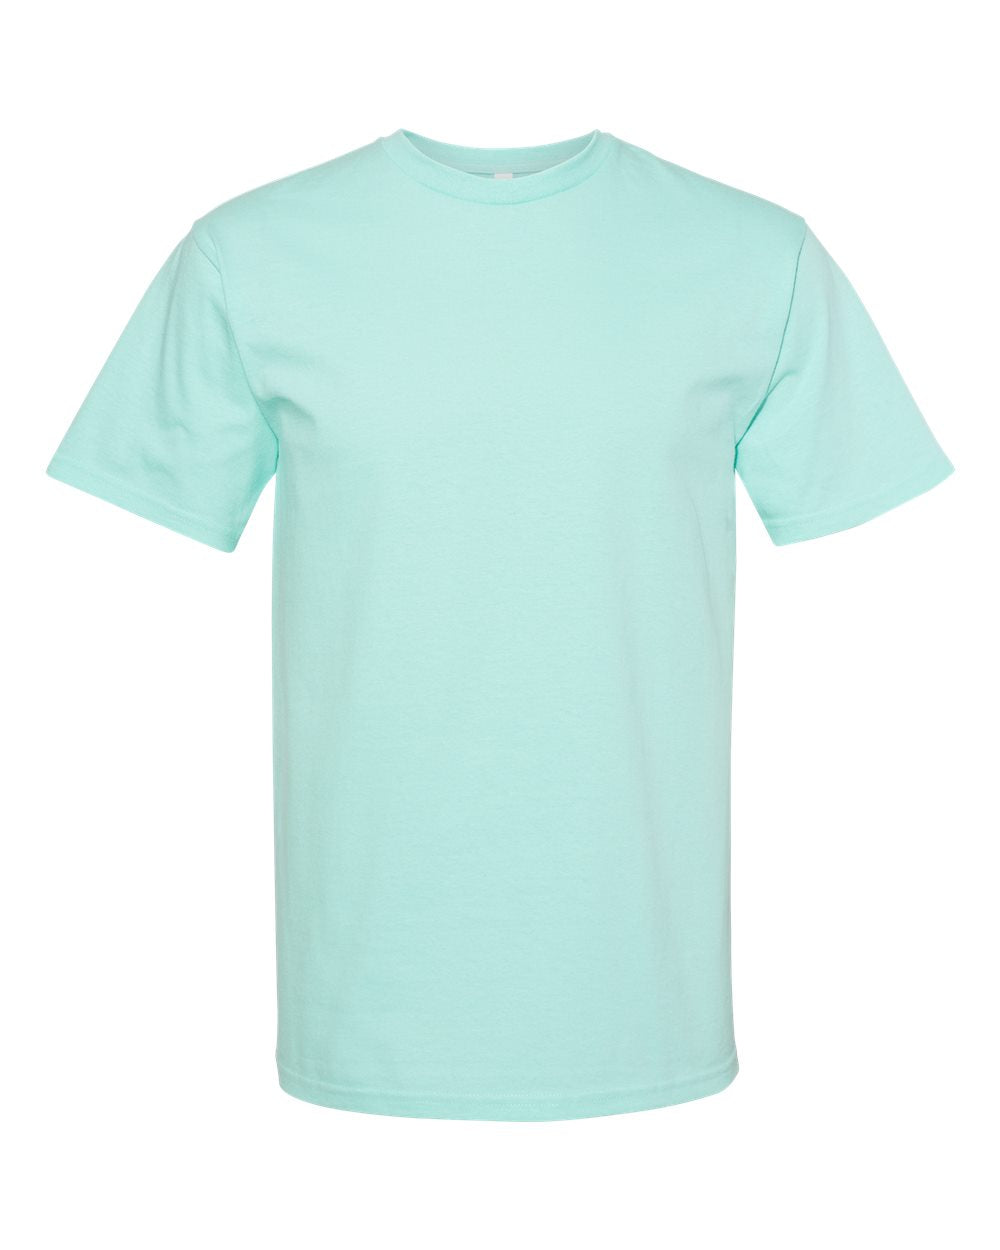 American Apparel Midweight Cotton Unisex Tee 1701 #color_Celadon